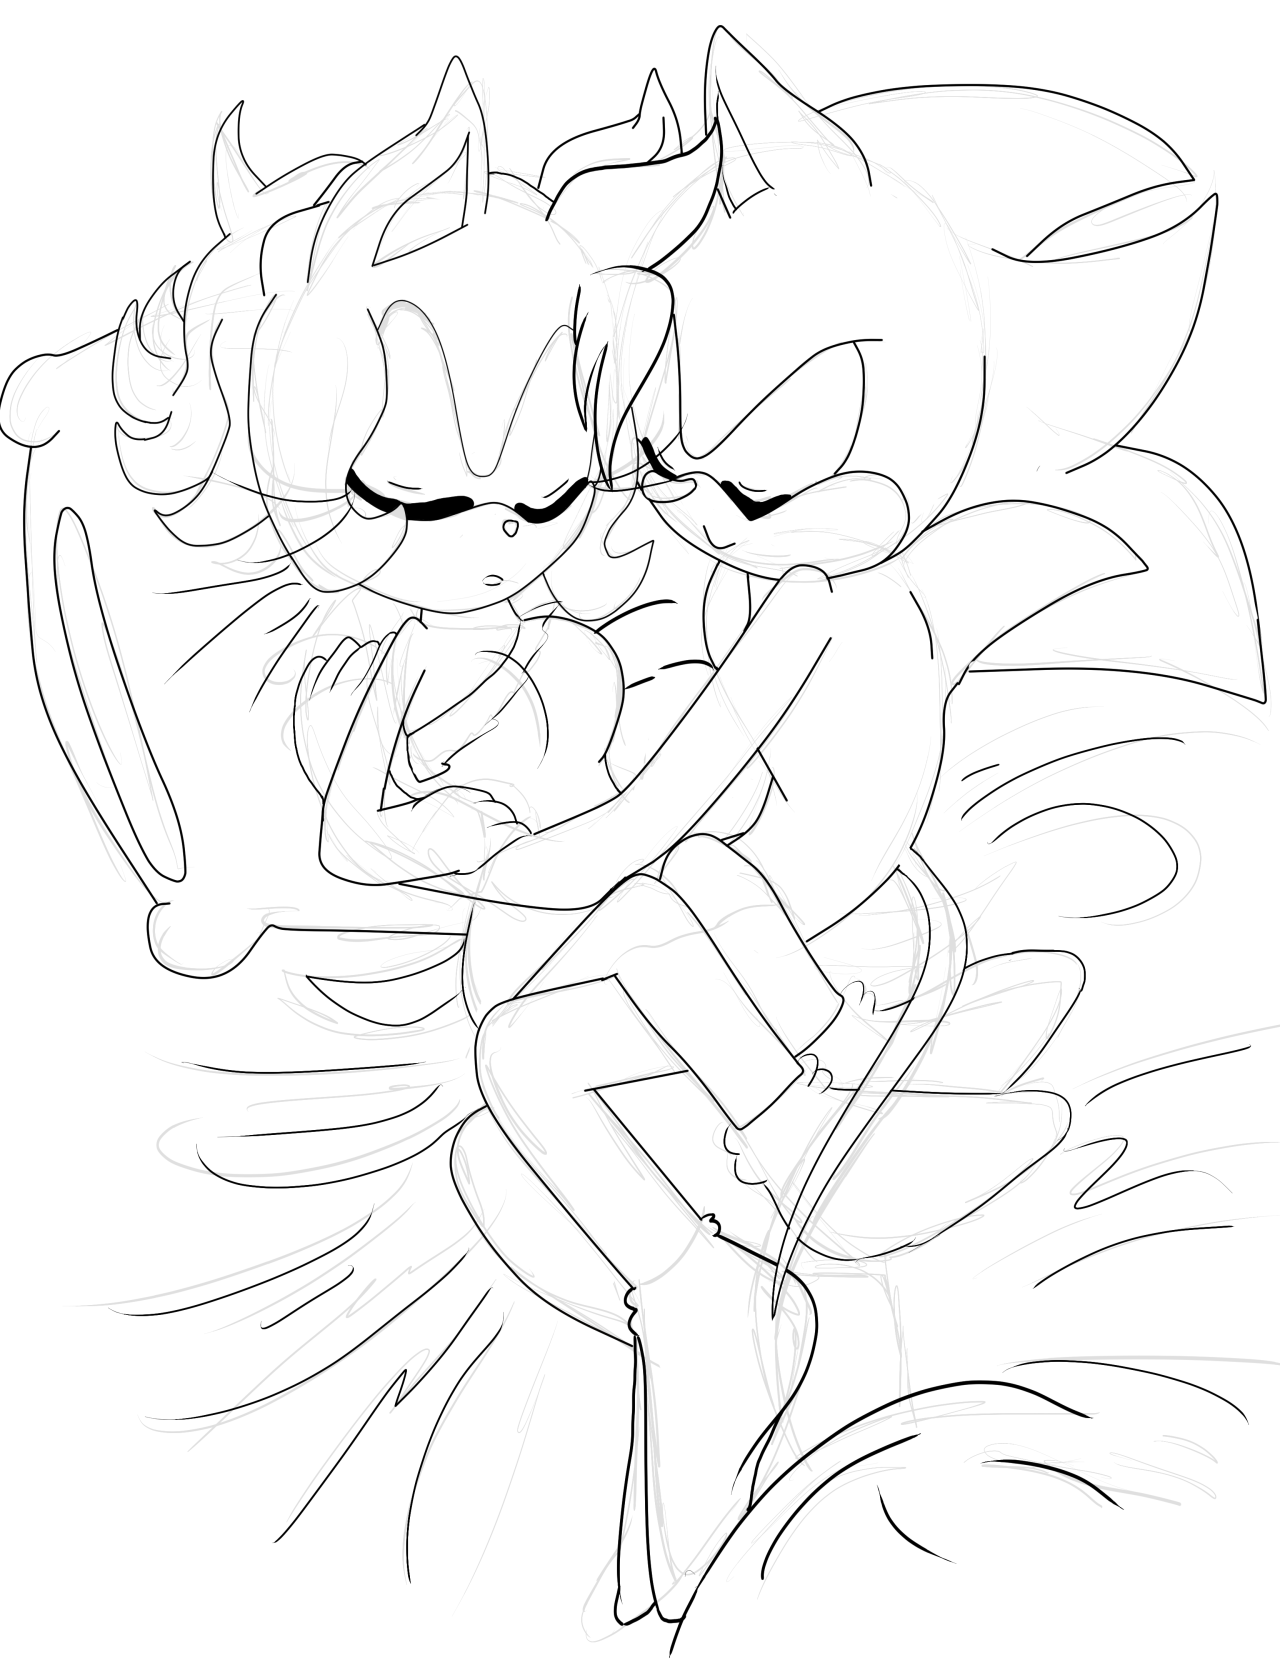 mak-c:

happy birthday to @ask-alex-hedgehog looks like alex snuck in to bed with dani again she”s gonna kill you when she wakes up haha 


AAAAAH this is so cute! &gt;3&lt;they are so CUTE! They are all floof and snuggled ;O;aaaaaah tHANK CHU MAK! &gt;O&lt;Icannotevenomgmyheart